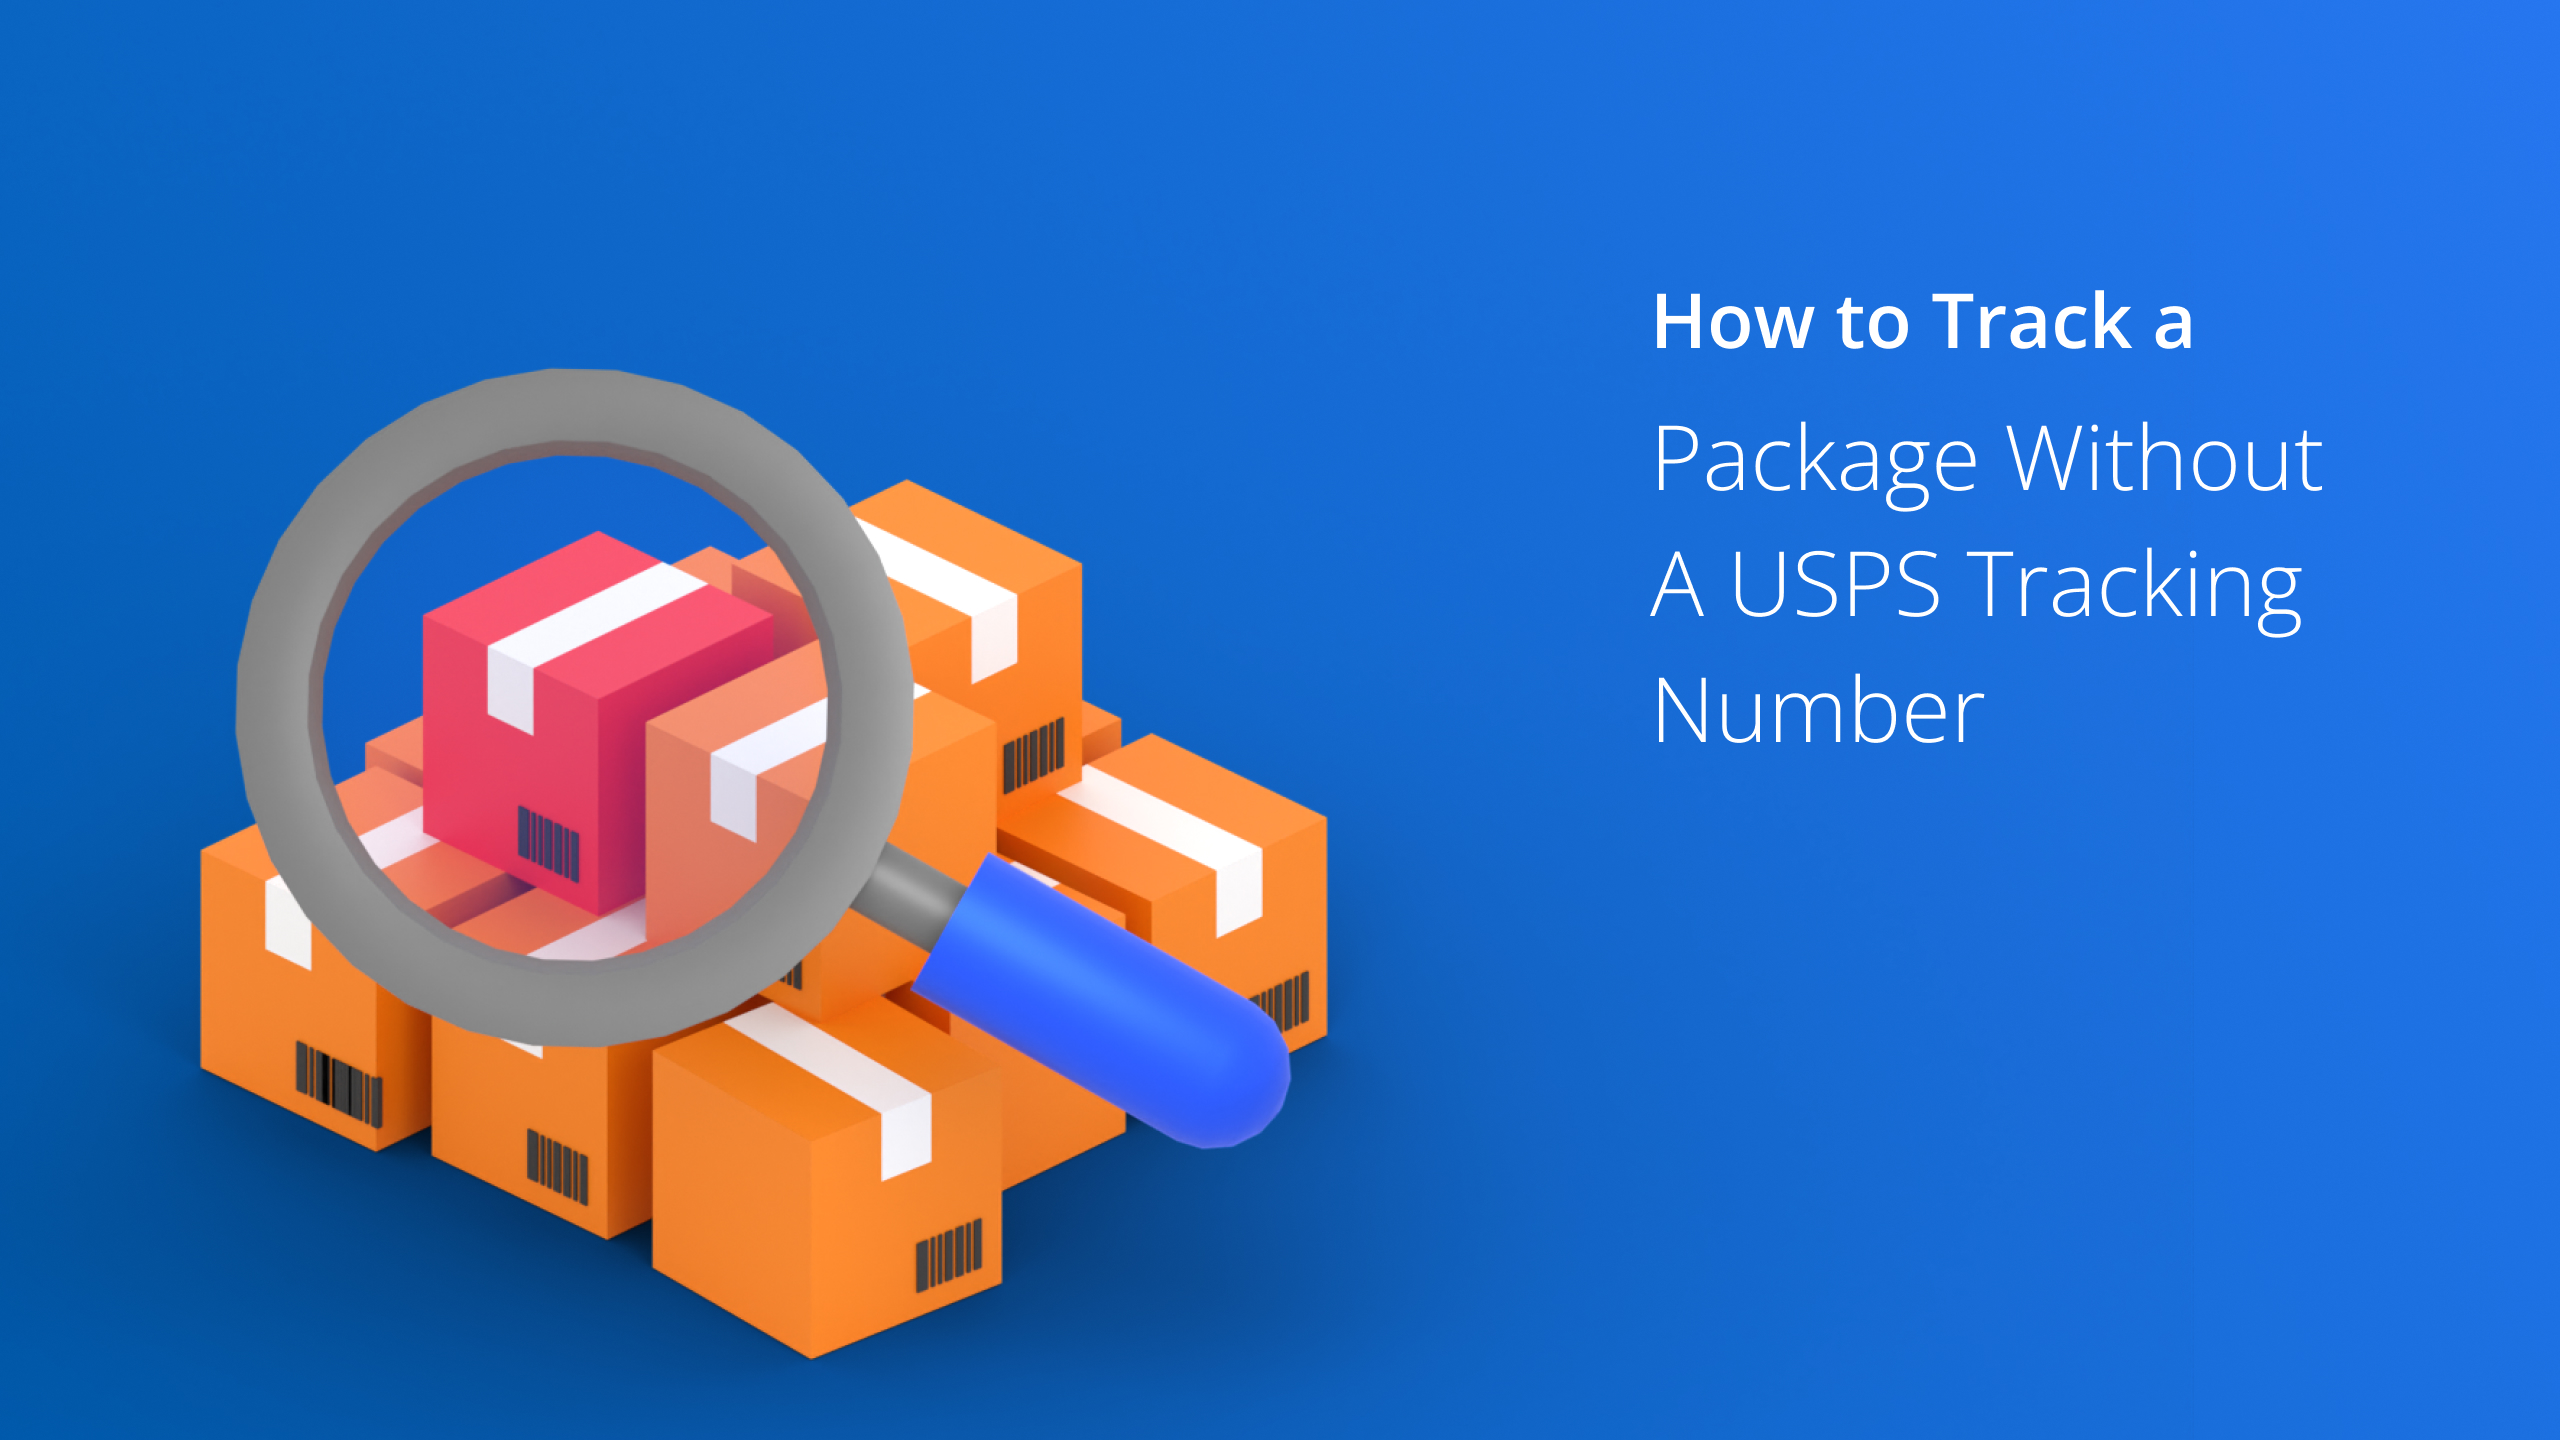 Custom Image - How to Track a Package Without a USPS Tracking Number